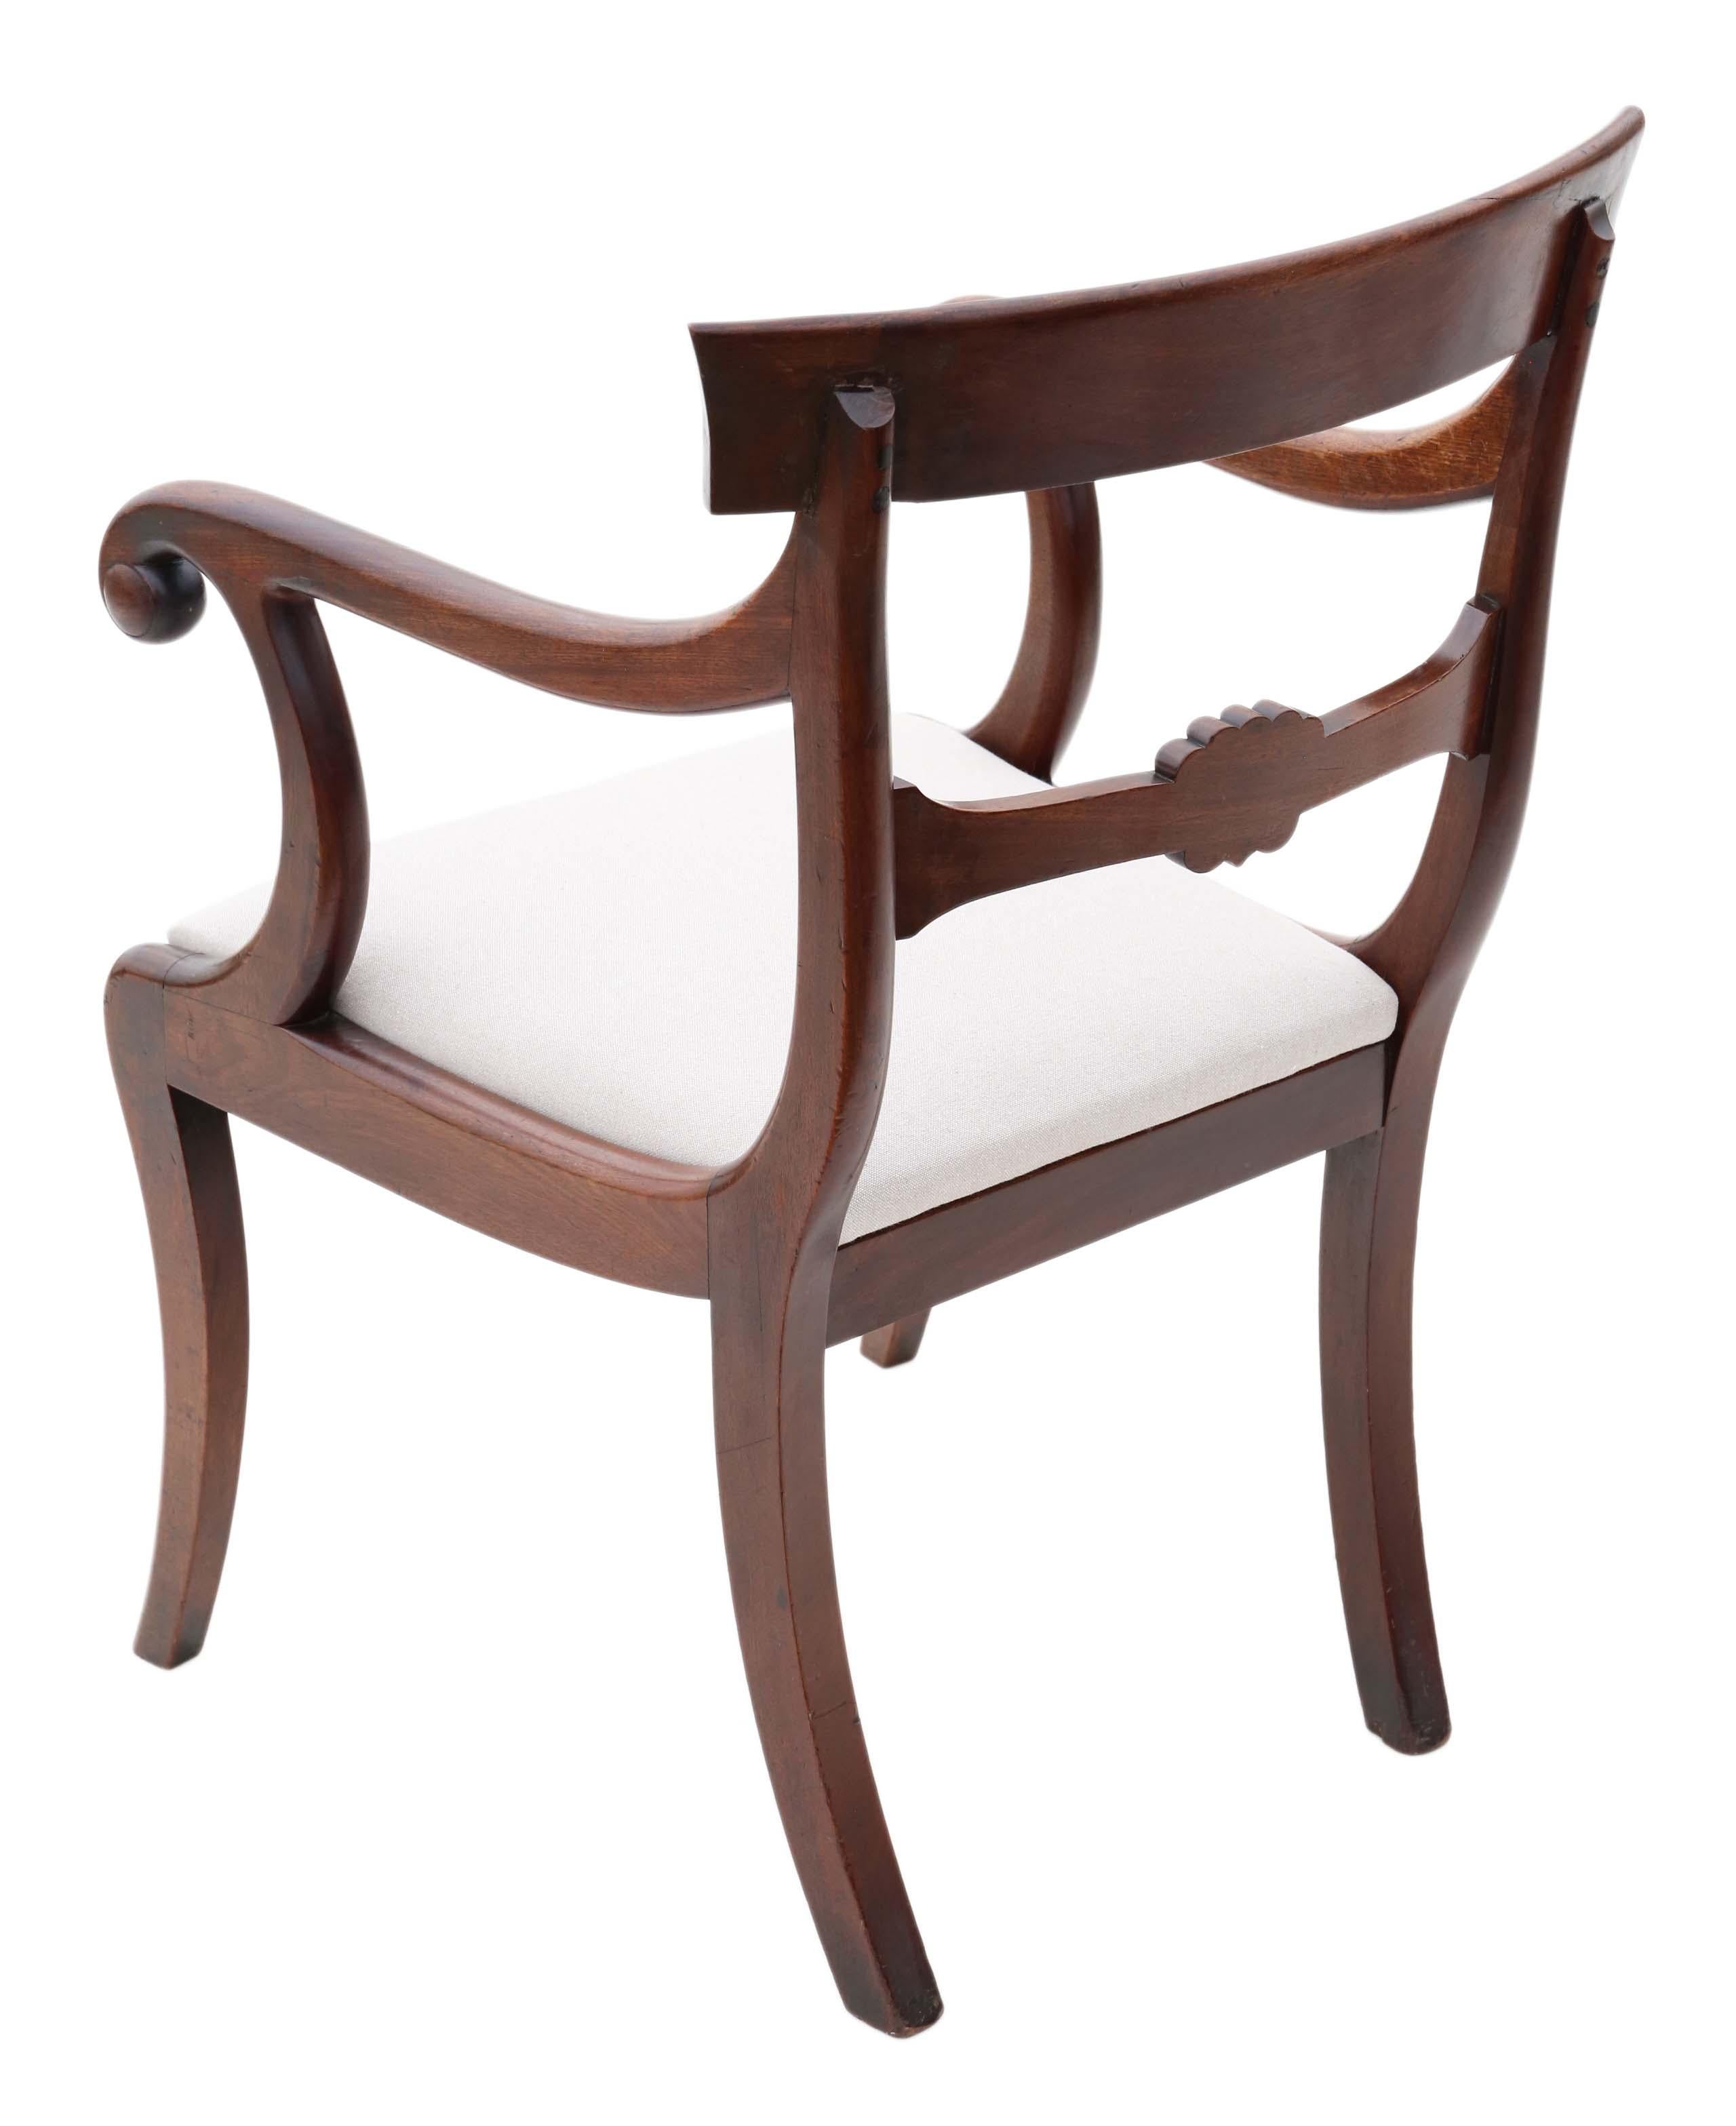 Regency Cuban Mahogany Dining Chairs: Set of 6 (4+2), Antique Quality, C1825 For Sale 1